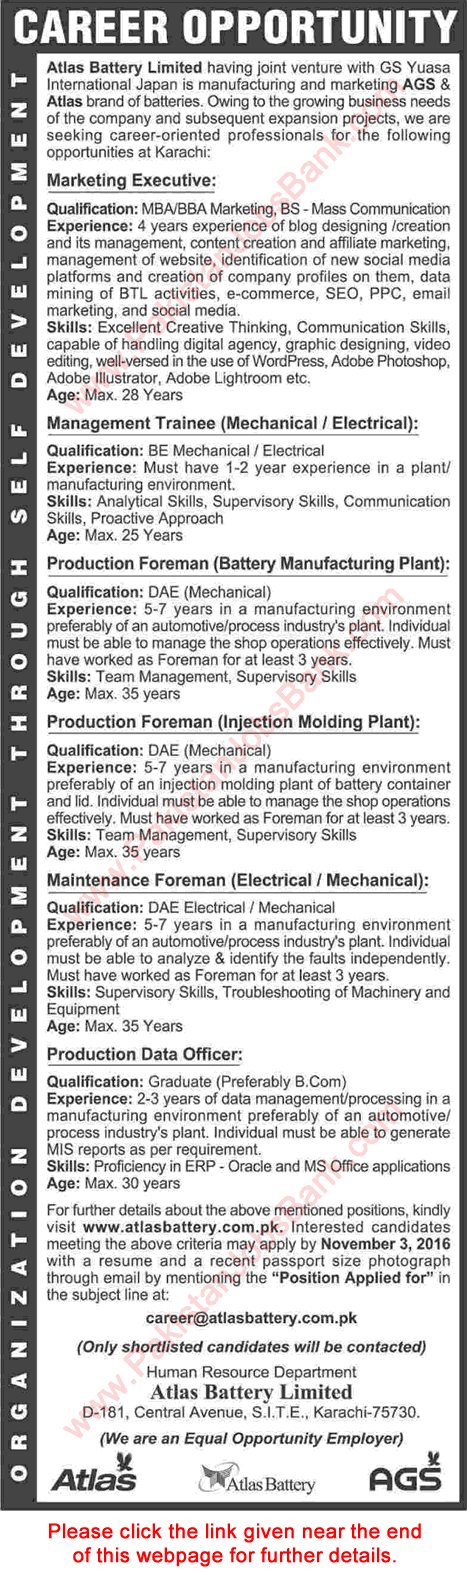 Atlas Battery Limited Jobs October 2016 Karachi Management Trainees, Marketing Executives & Others AGS Latest